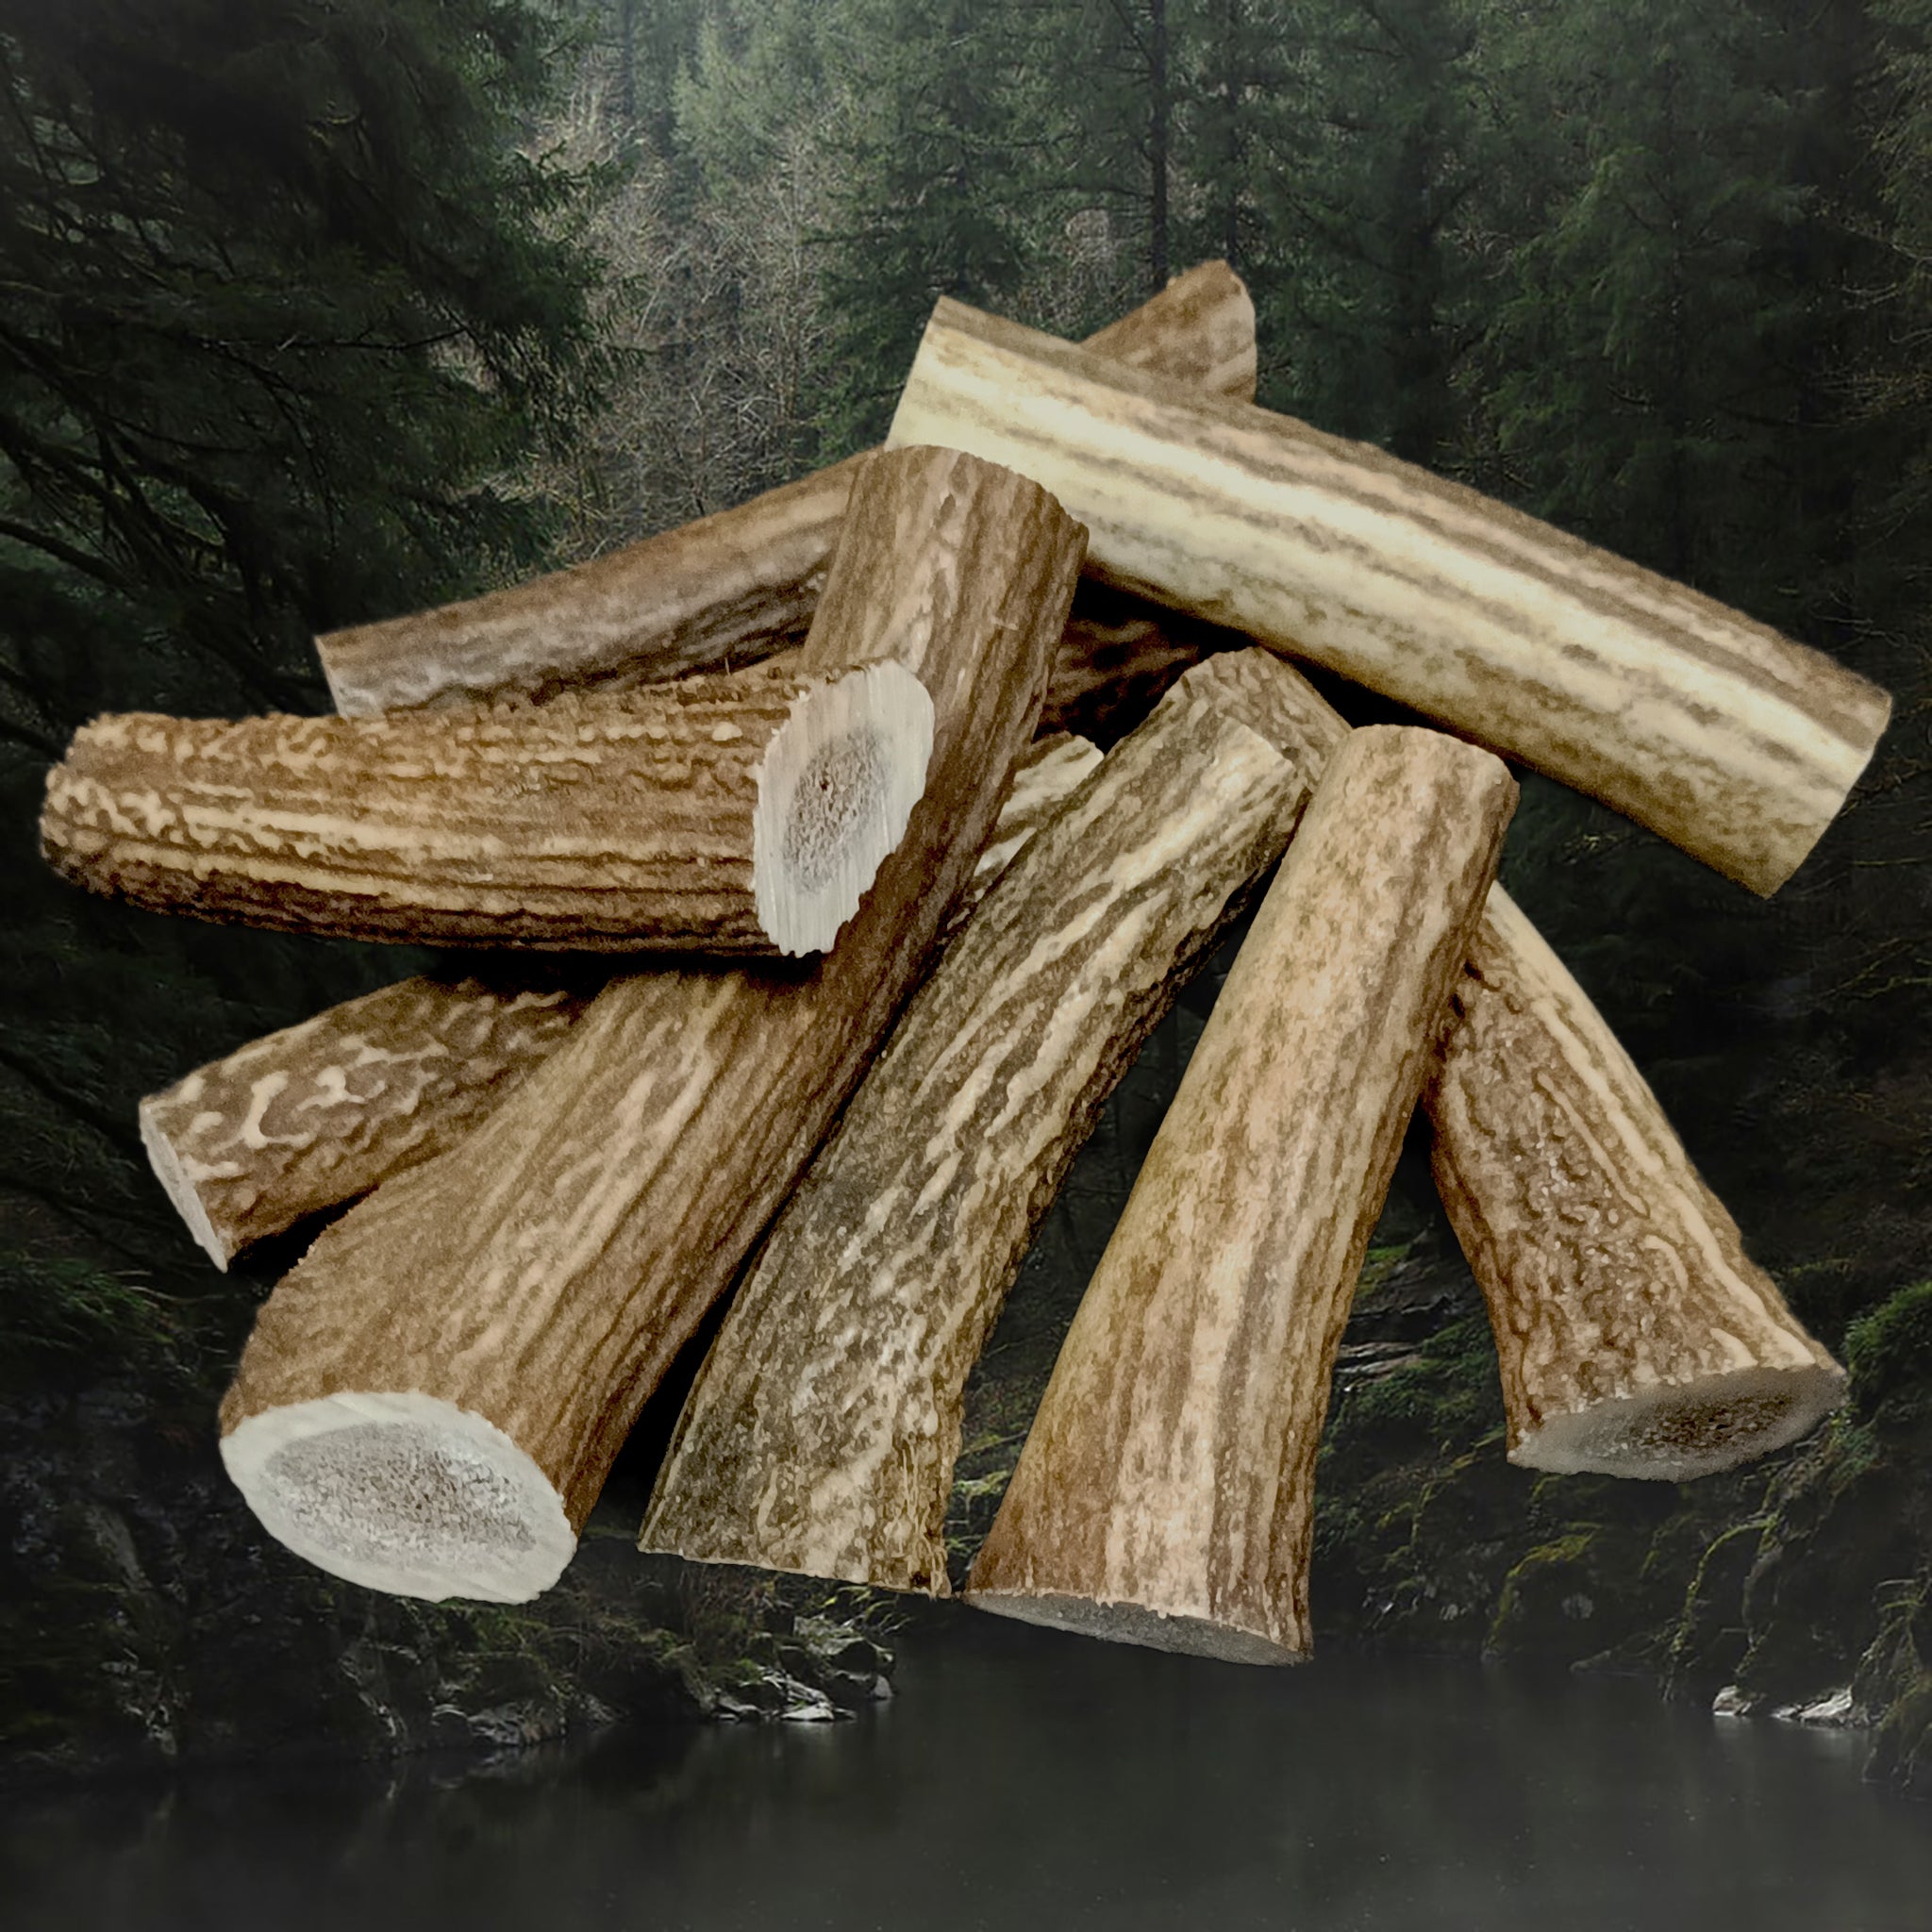 Scottish Stag Antler Rolls in Pile - Angle View